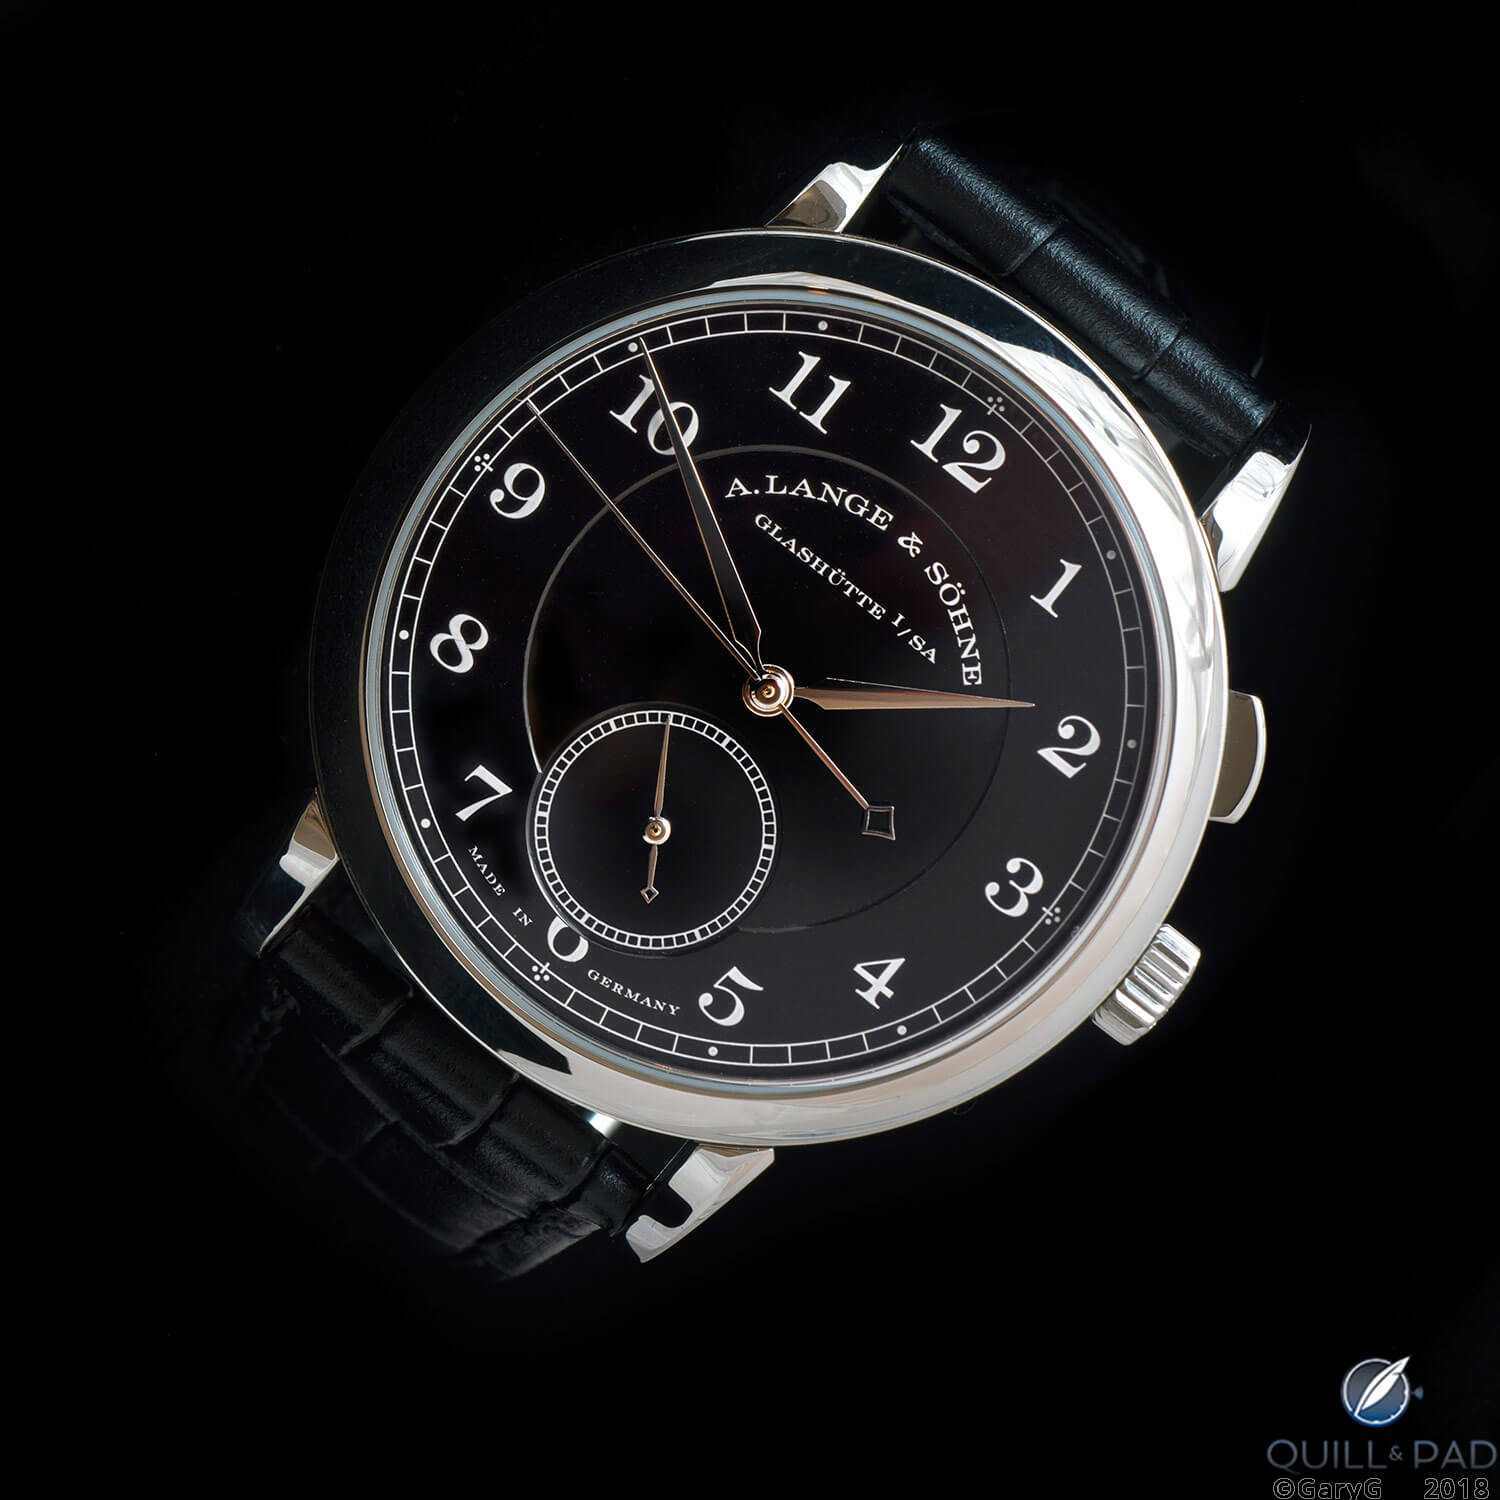 Yours if you keep bidding: Homage to Walter Lange unique piece